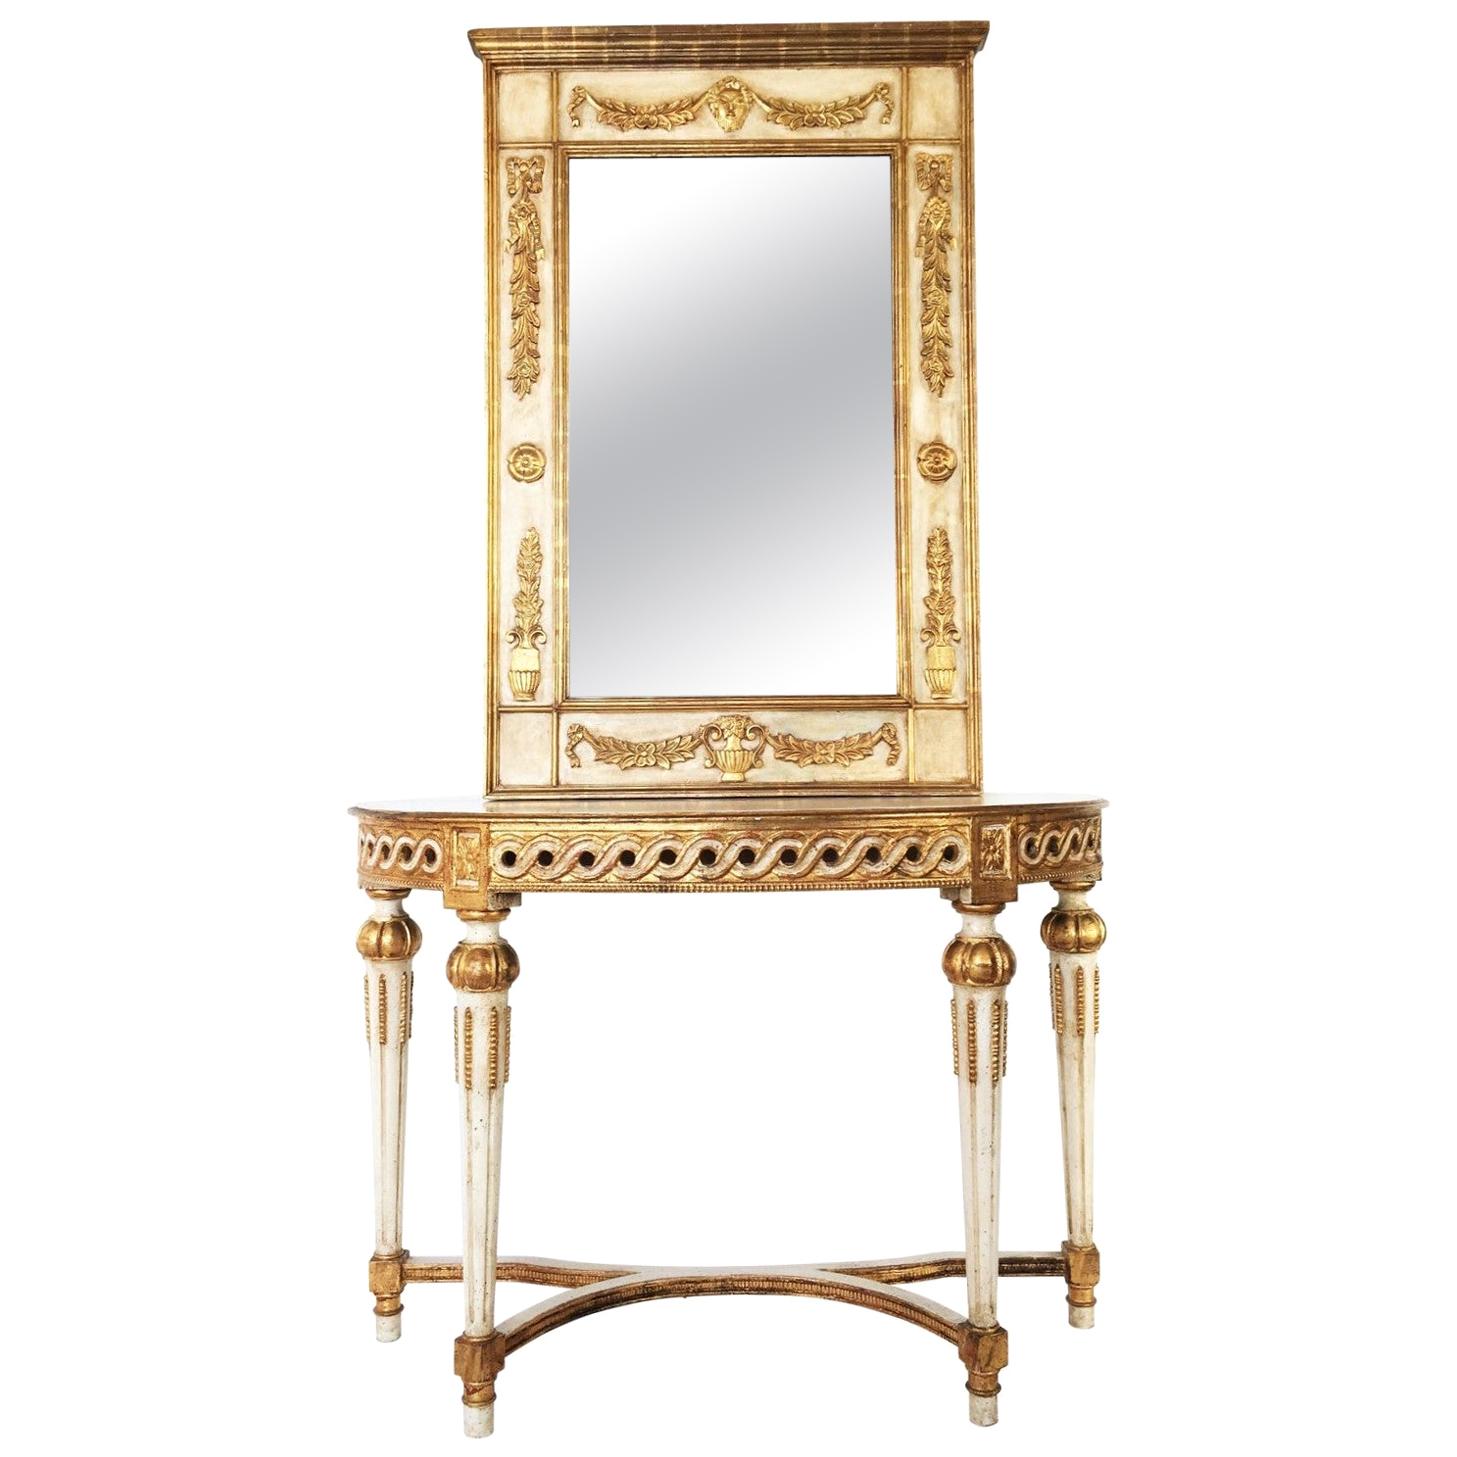 Italian Neoclassical Painted Giltwood Demilune Console with Matching Mirror